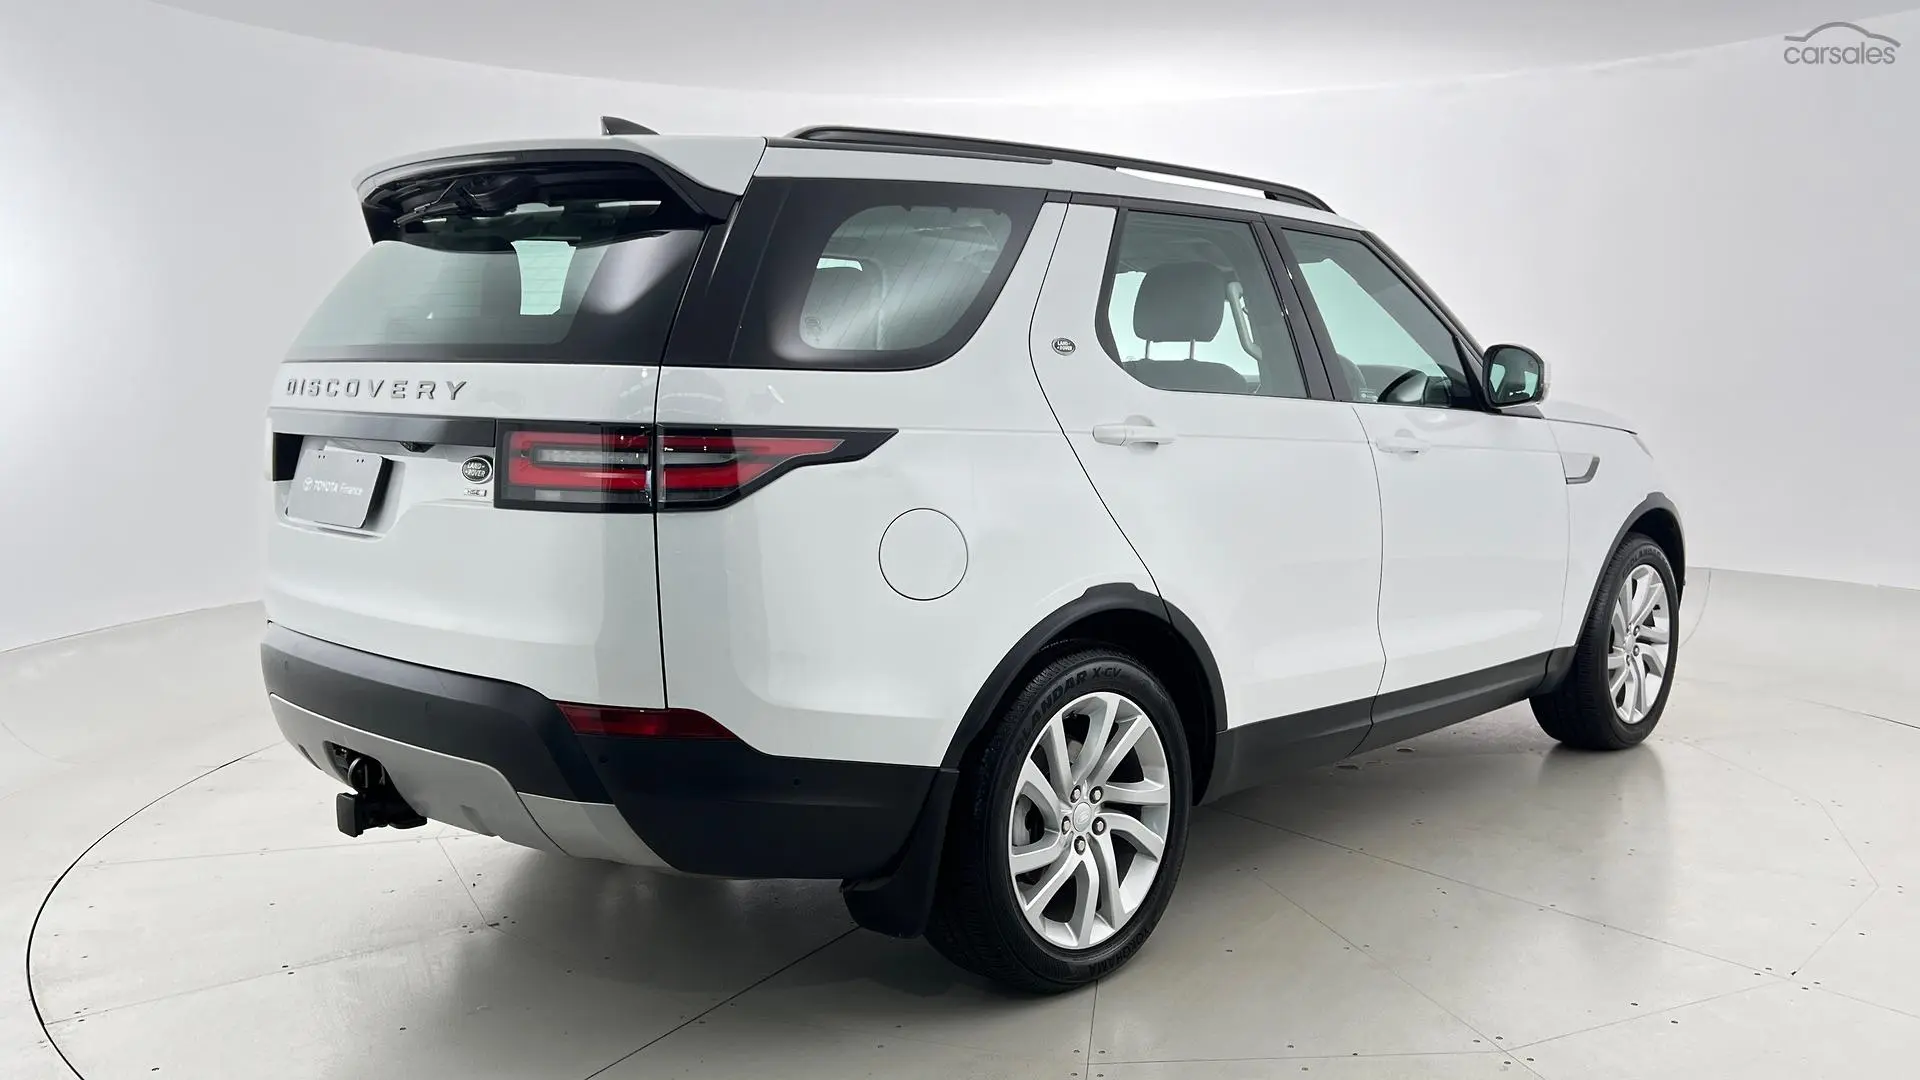 2018 Land Rover Discovery Image 6